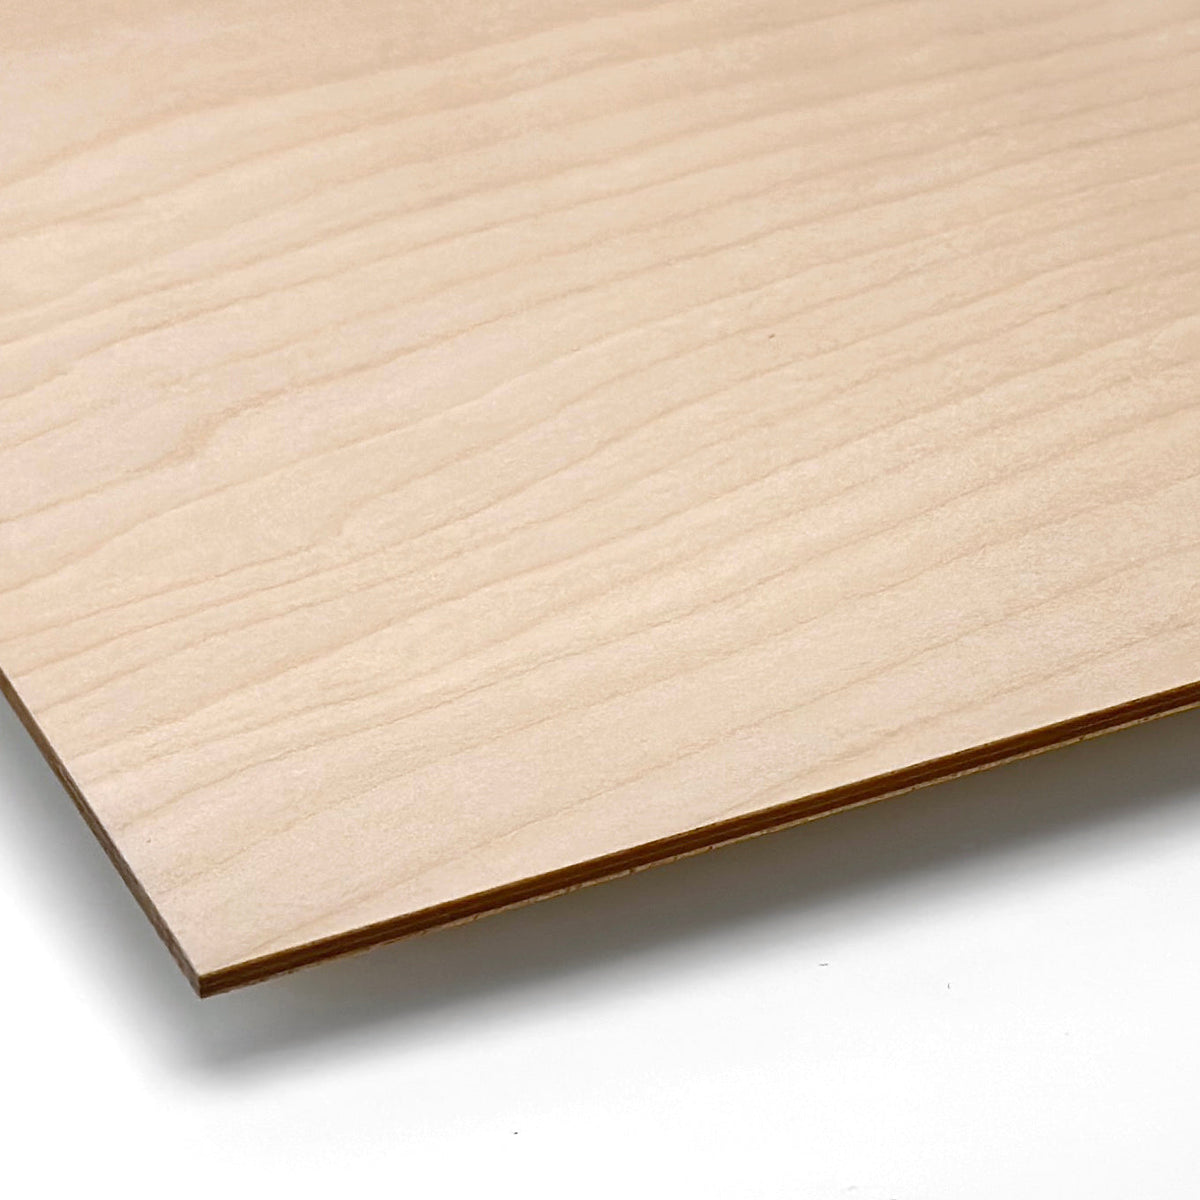 3mm Birch Plywood with laser cutting & double sided printing - 720x470mm